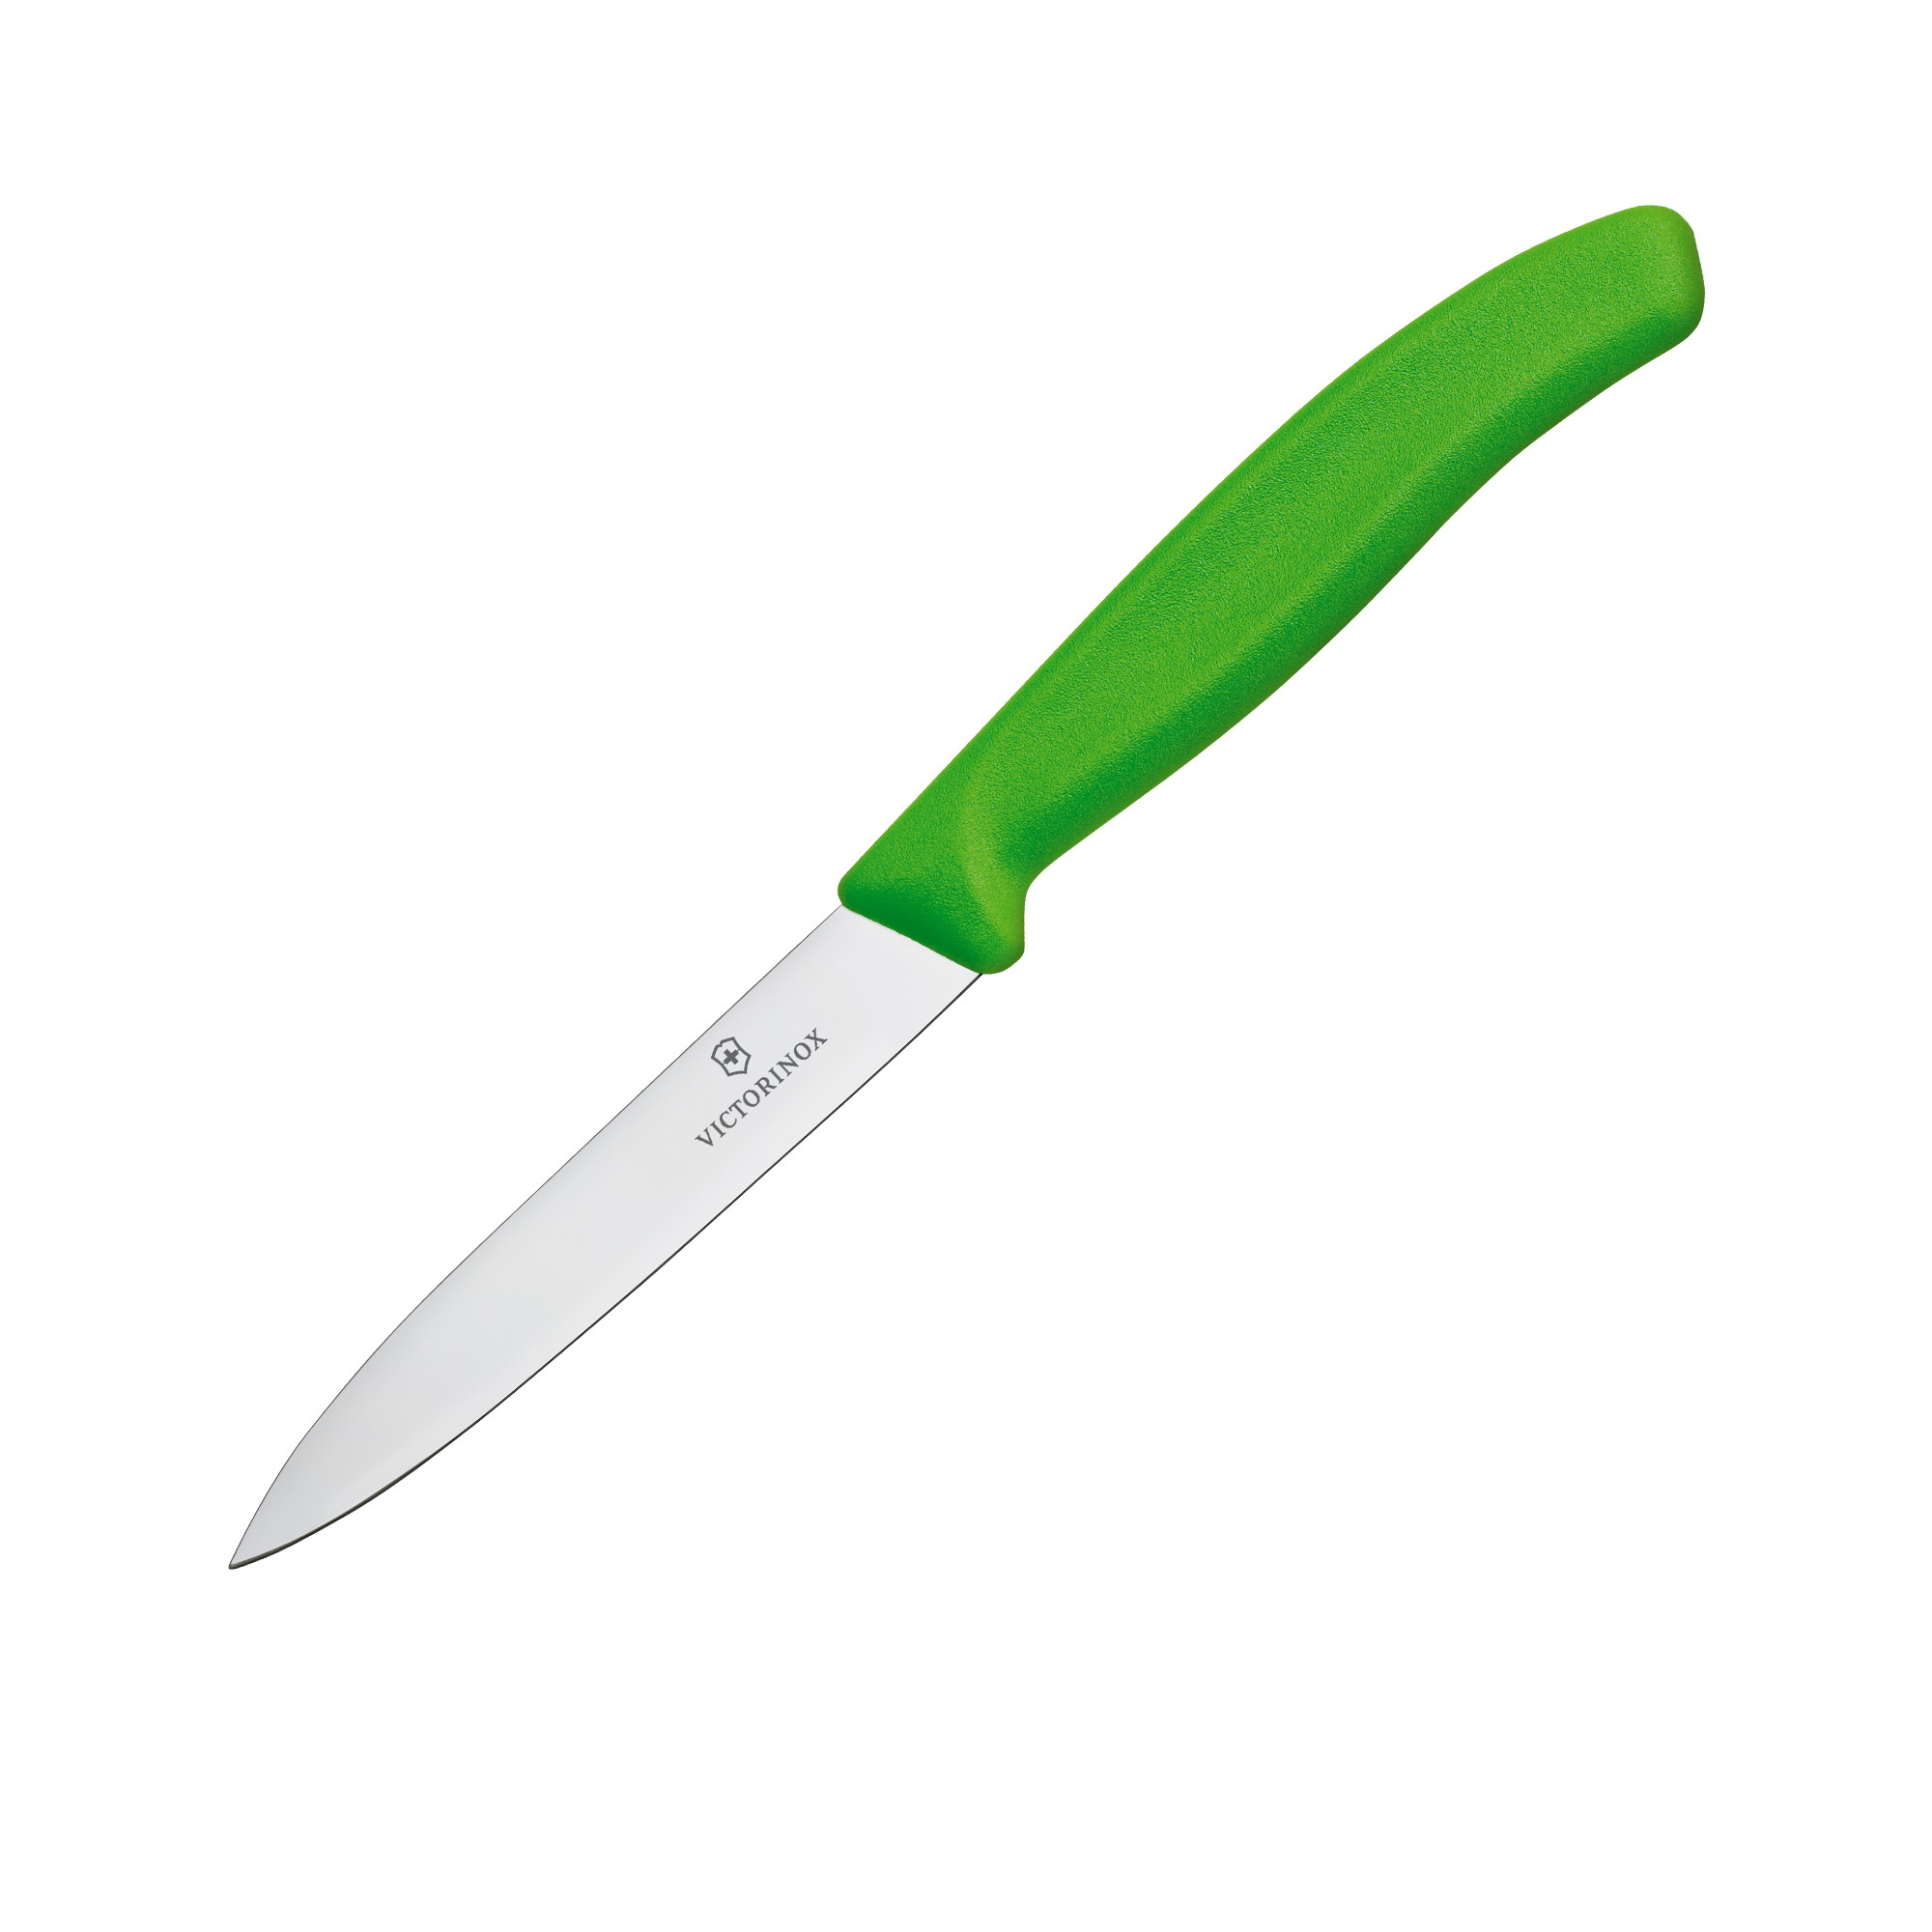 Victorinox Swiss Classic Pointed Tip Vegetable Knife 10cm Green Image 1